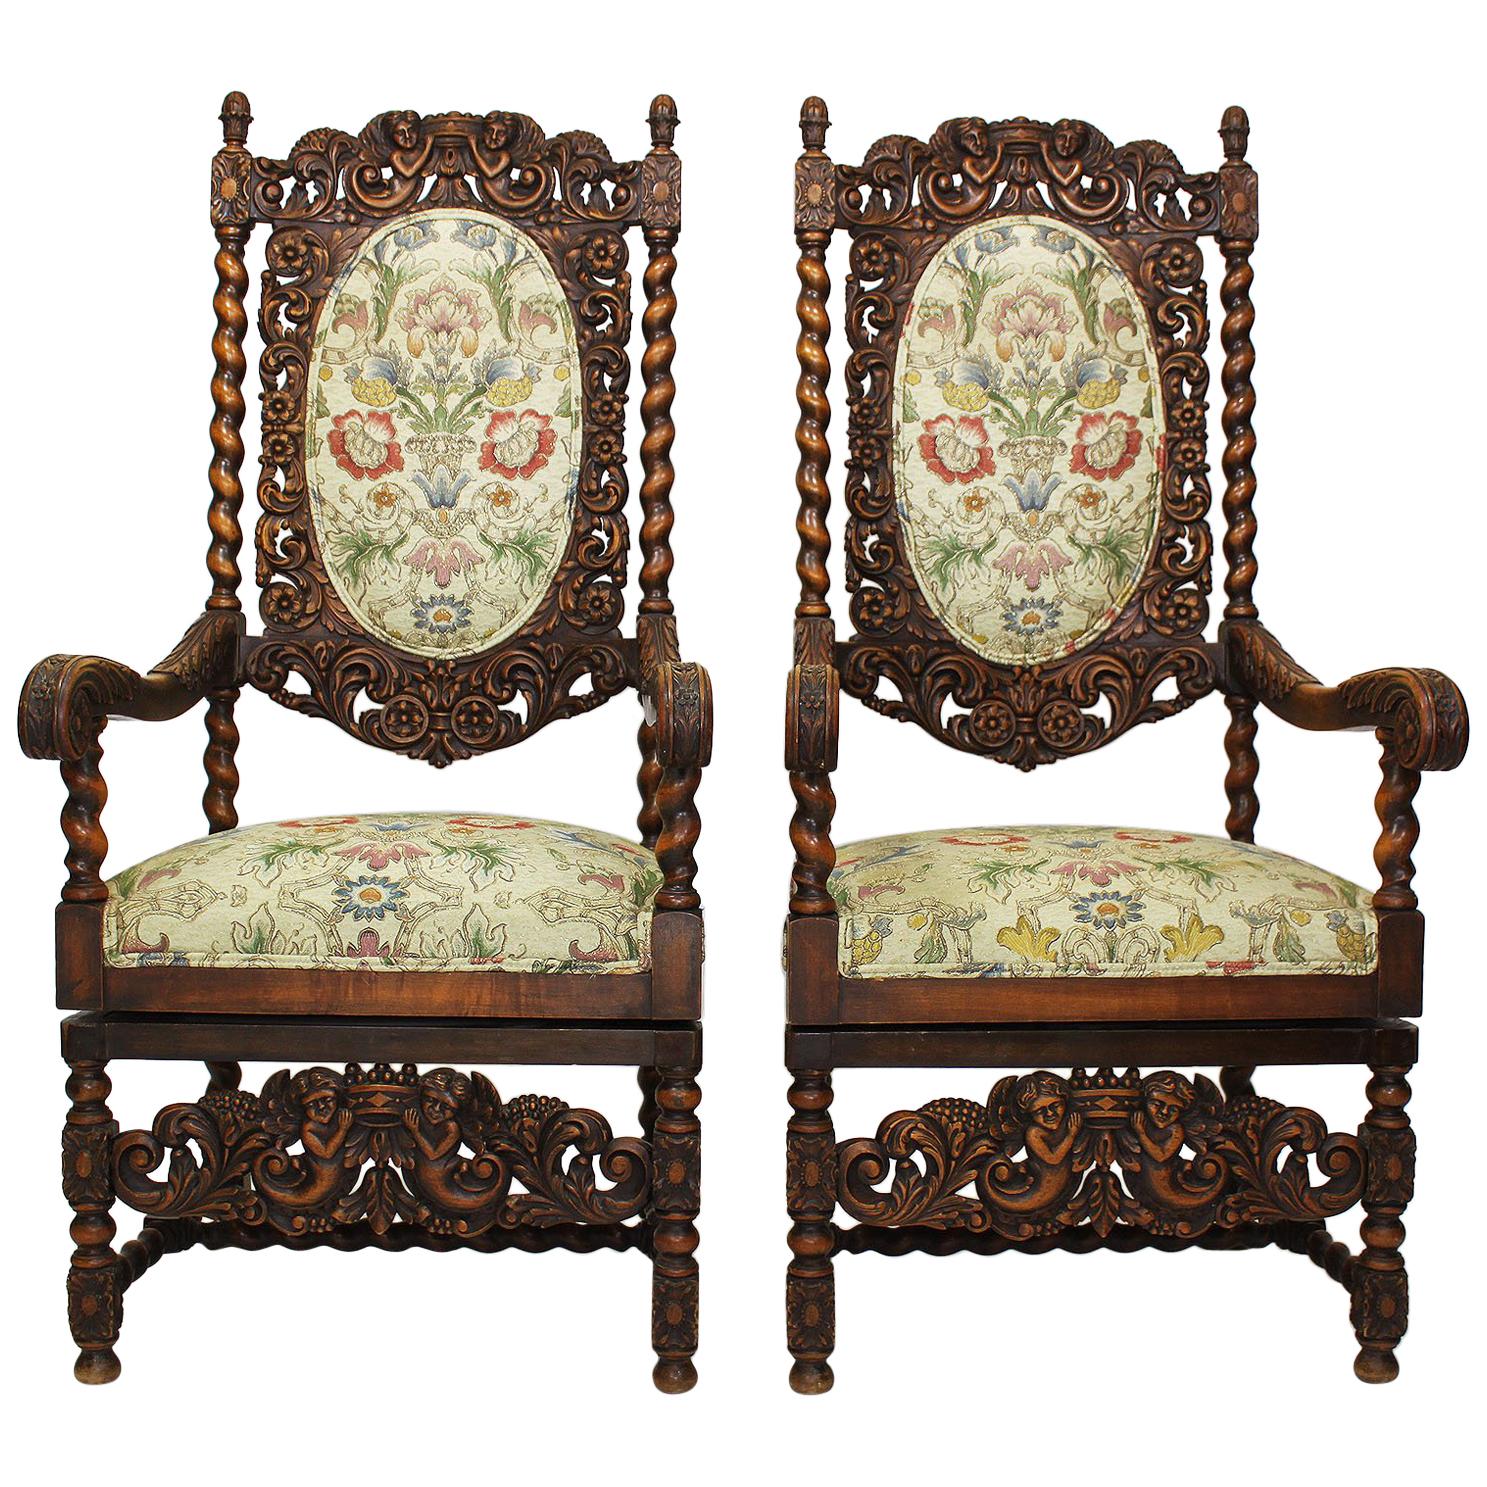 Pair of Italian 19th-20th Century Baroque Style Walnut Carved Throne Armchairs